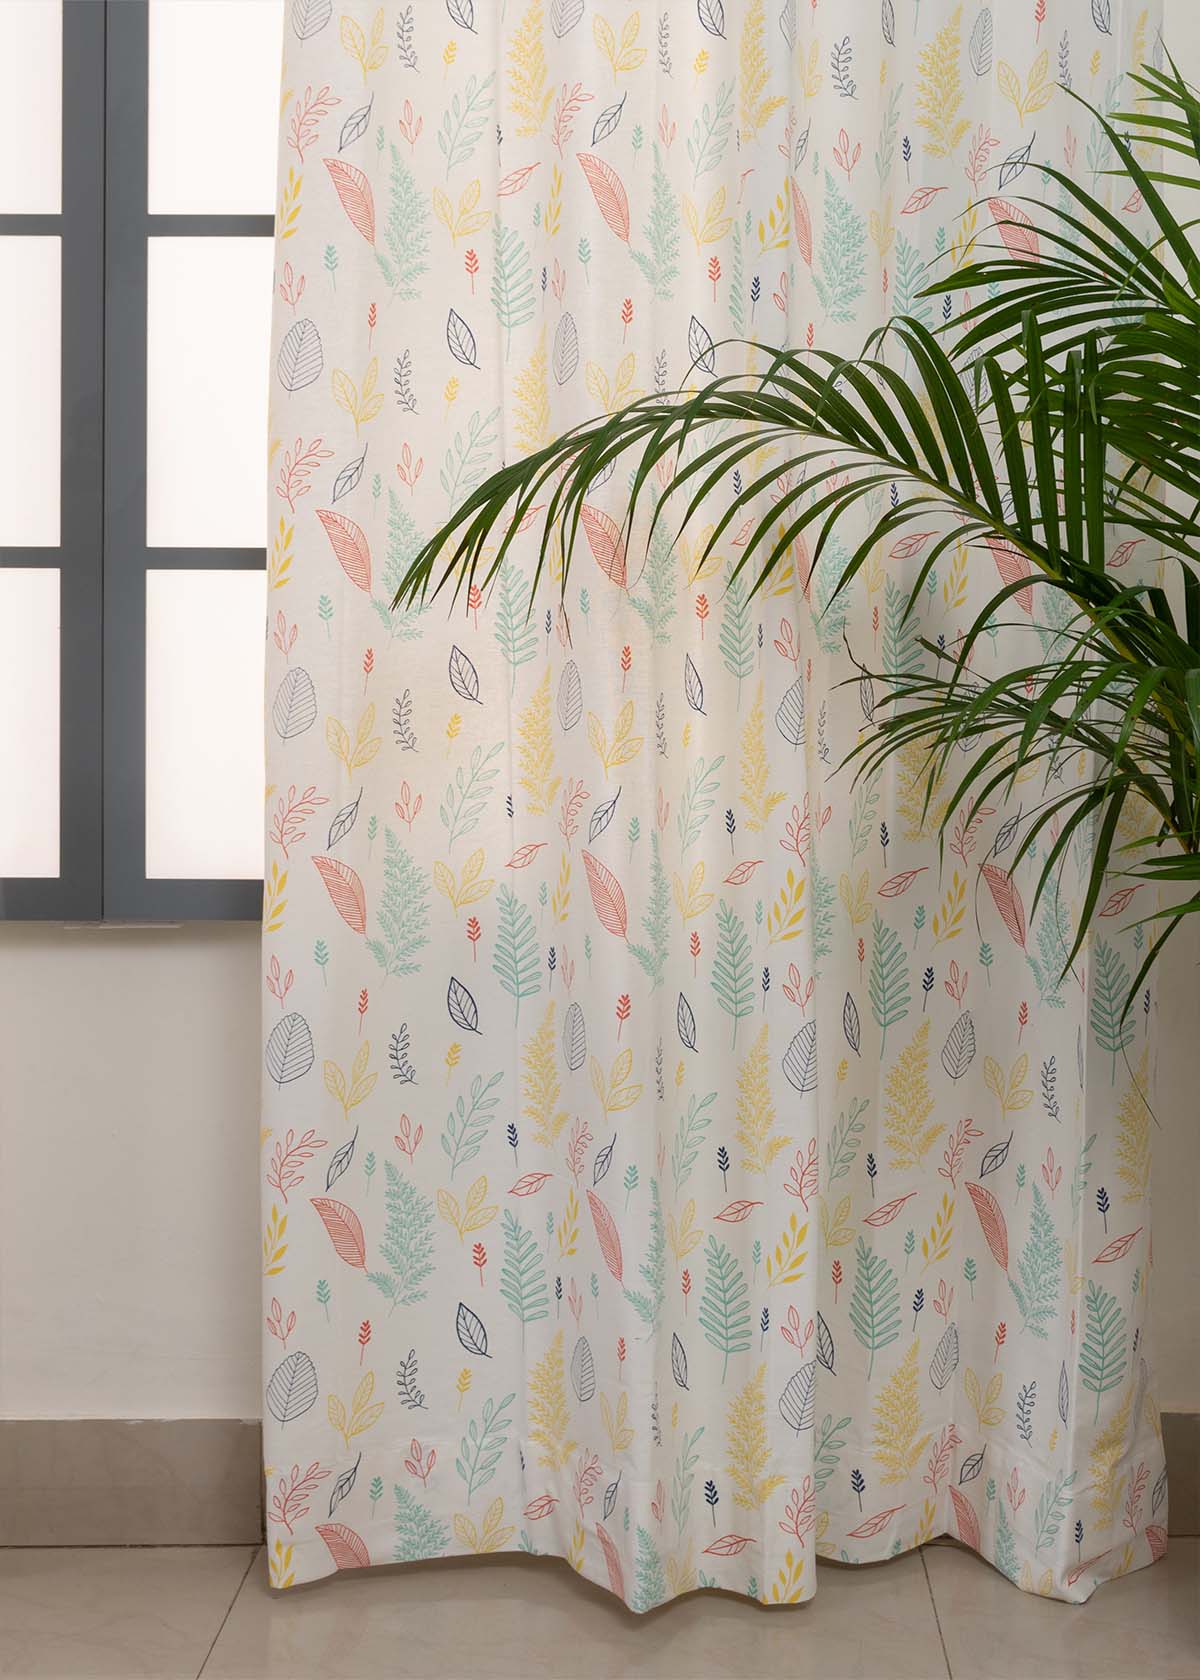 Rustling Leaves 100% cotton floral curtain for bed room - Room darkening - Multicolor - Pack of 1